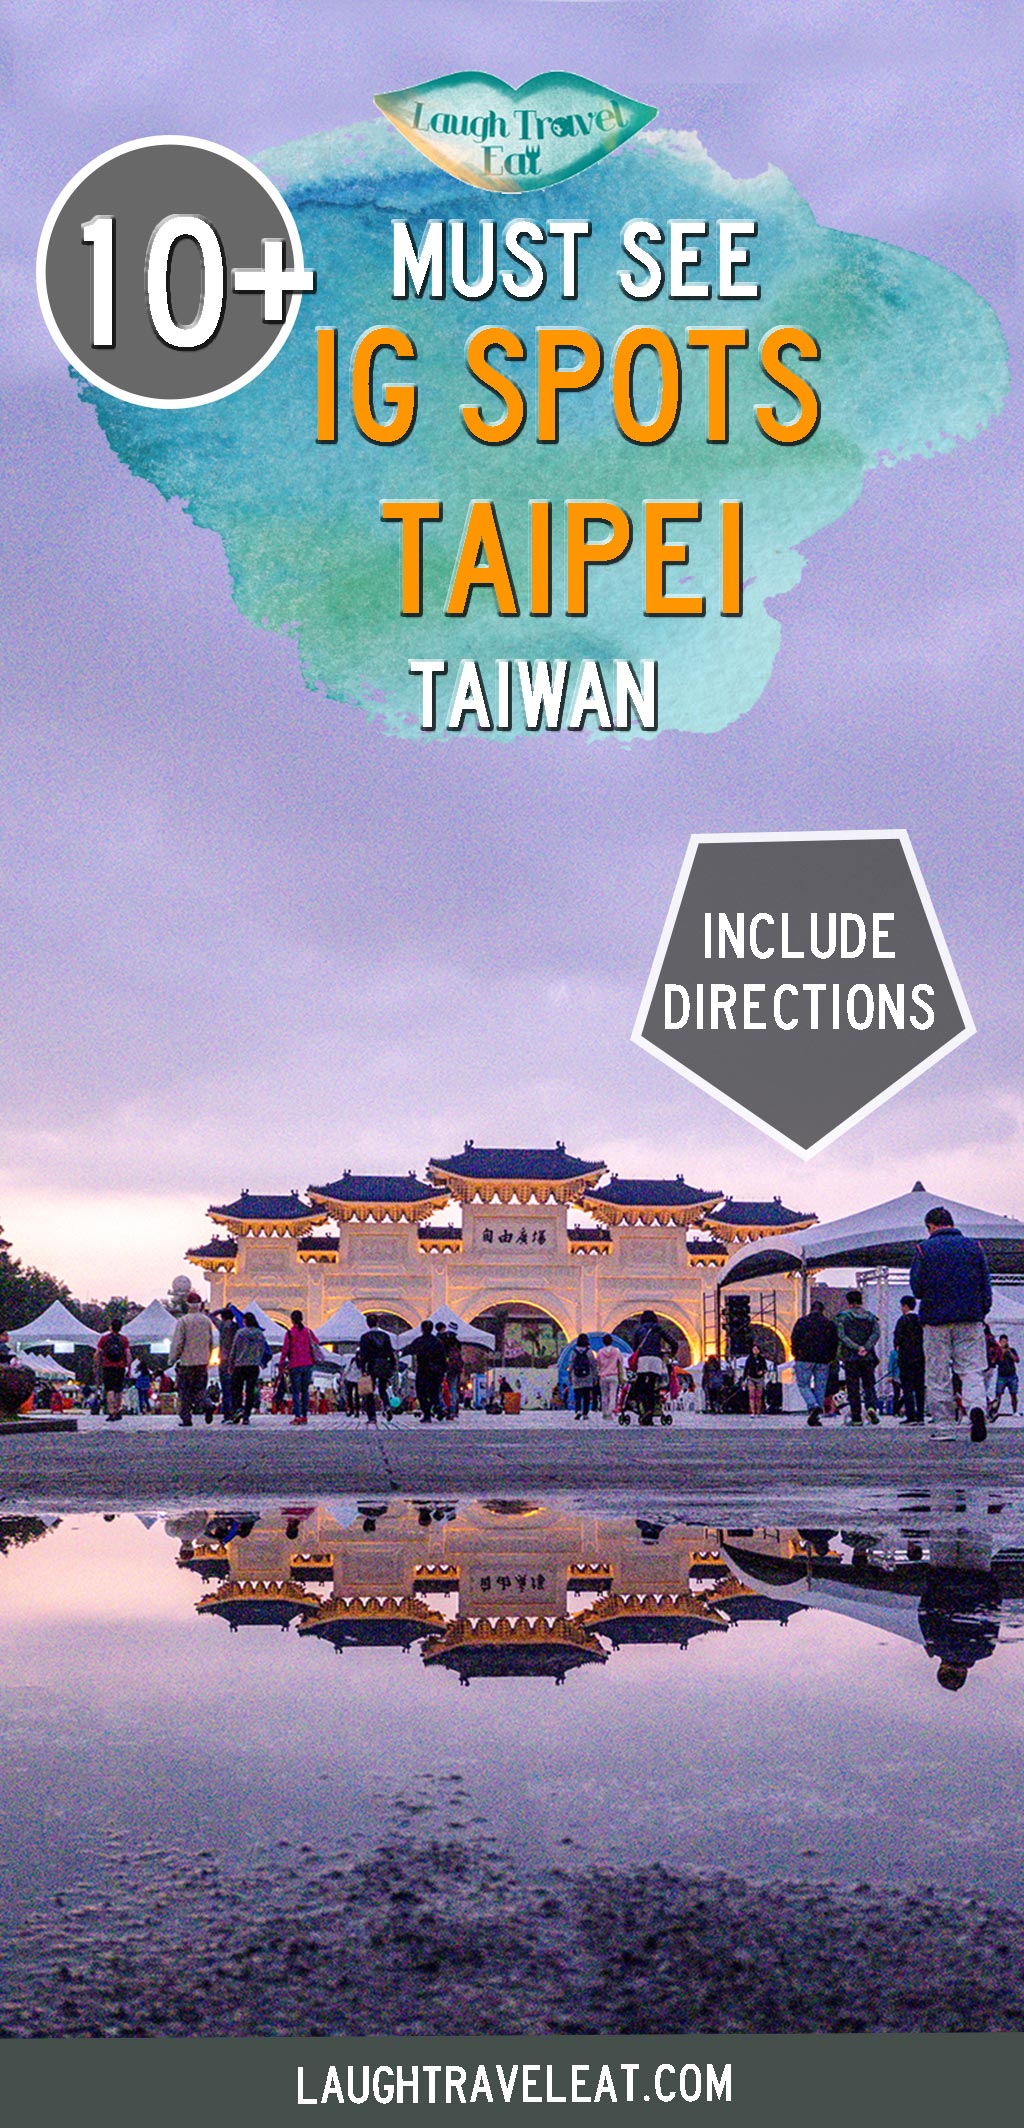 Discover Taipei's best sightseeing spots that also make great instagram shots! Directions included! #taipei #taiwan #instagram